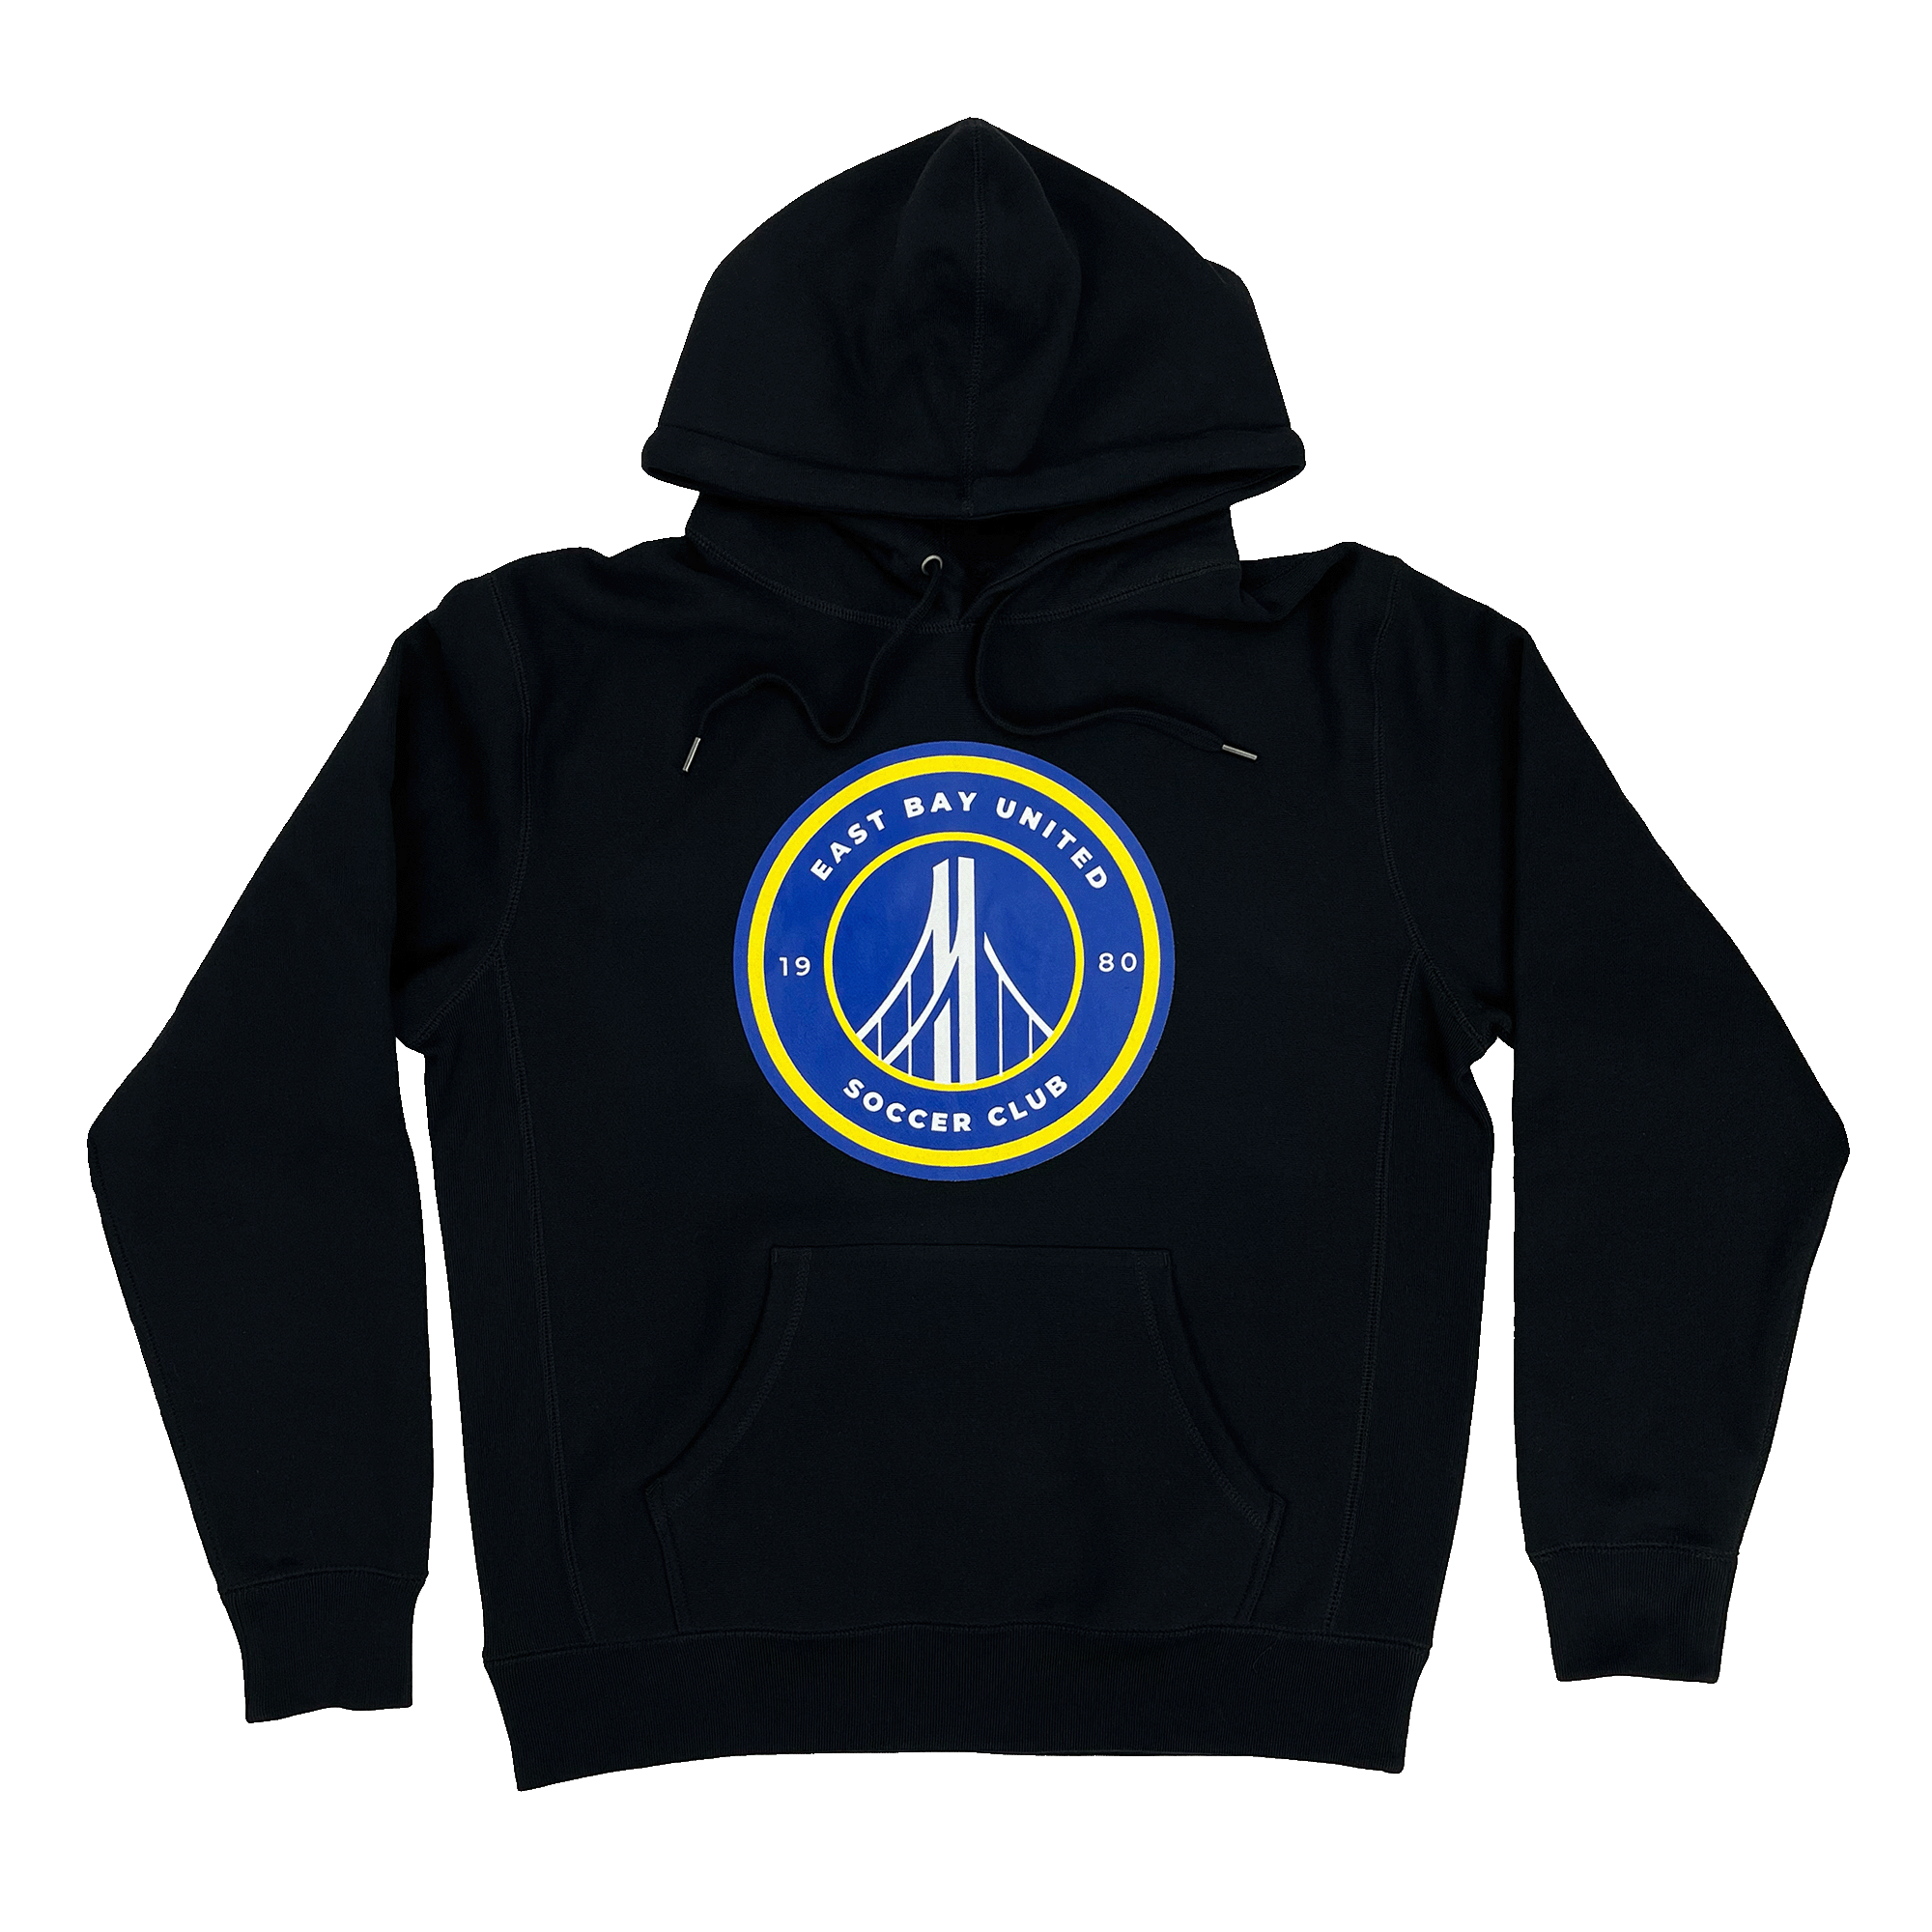 Front view of black hoodie sweatshirt with round blue, white, and yellow East Bay United Soccer Club 1980 logo on the front chest.